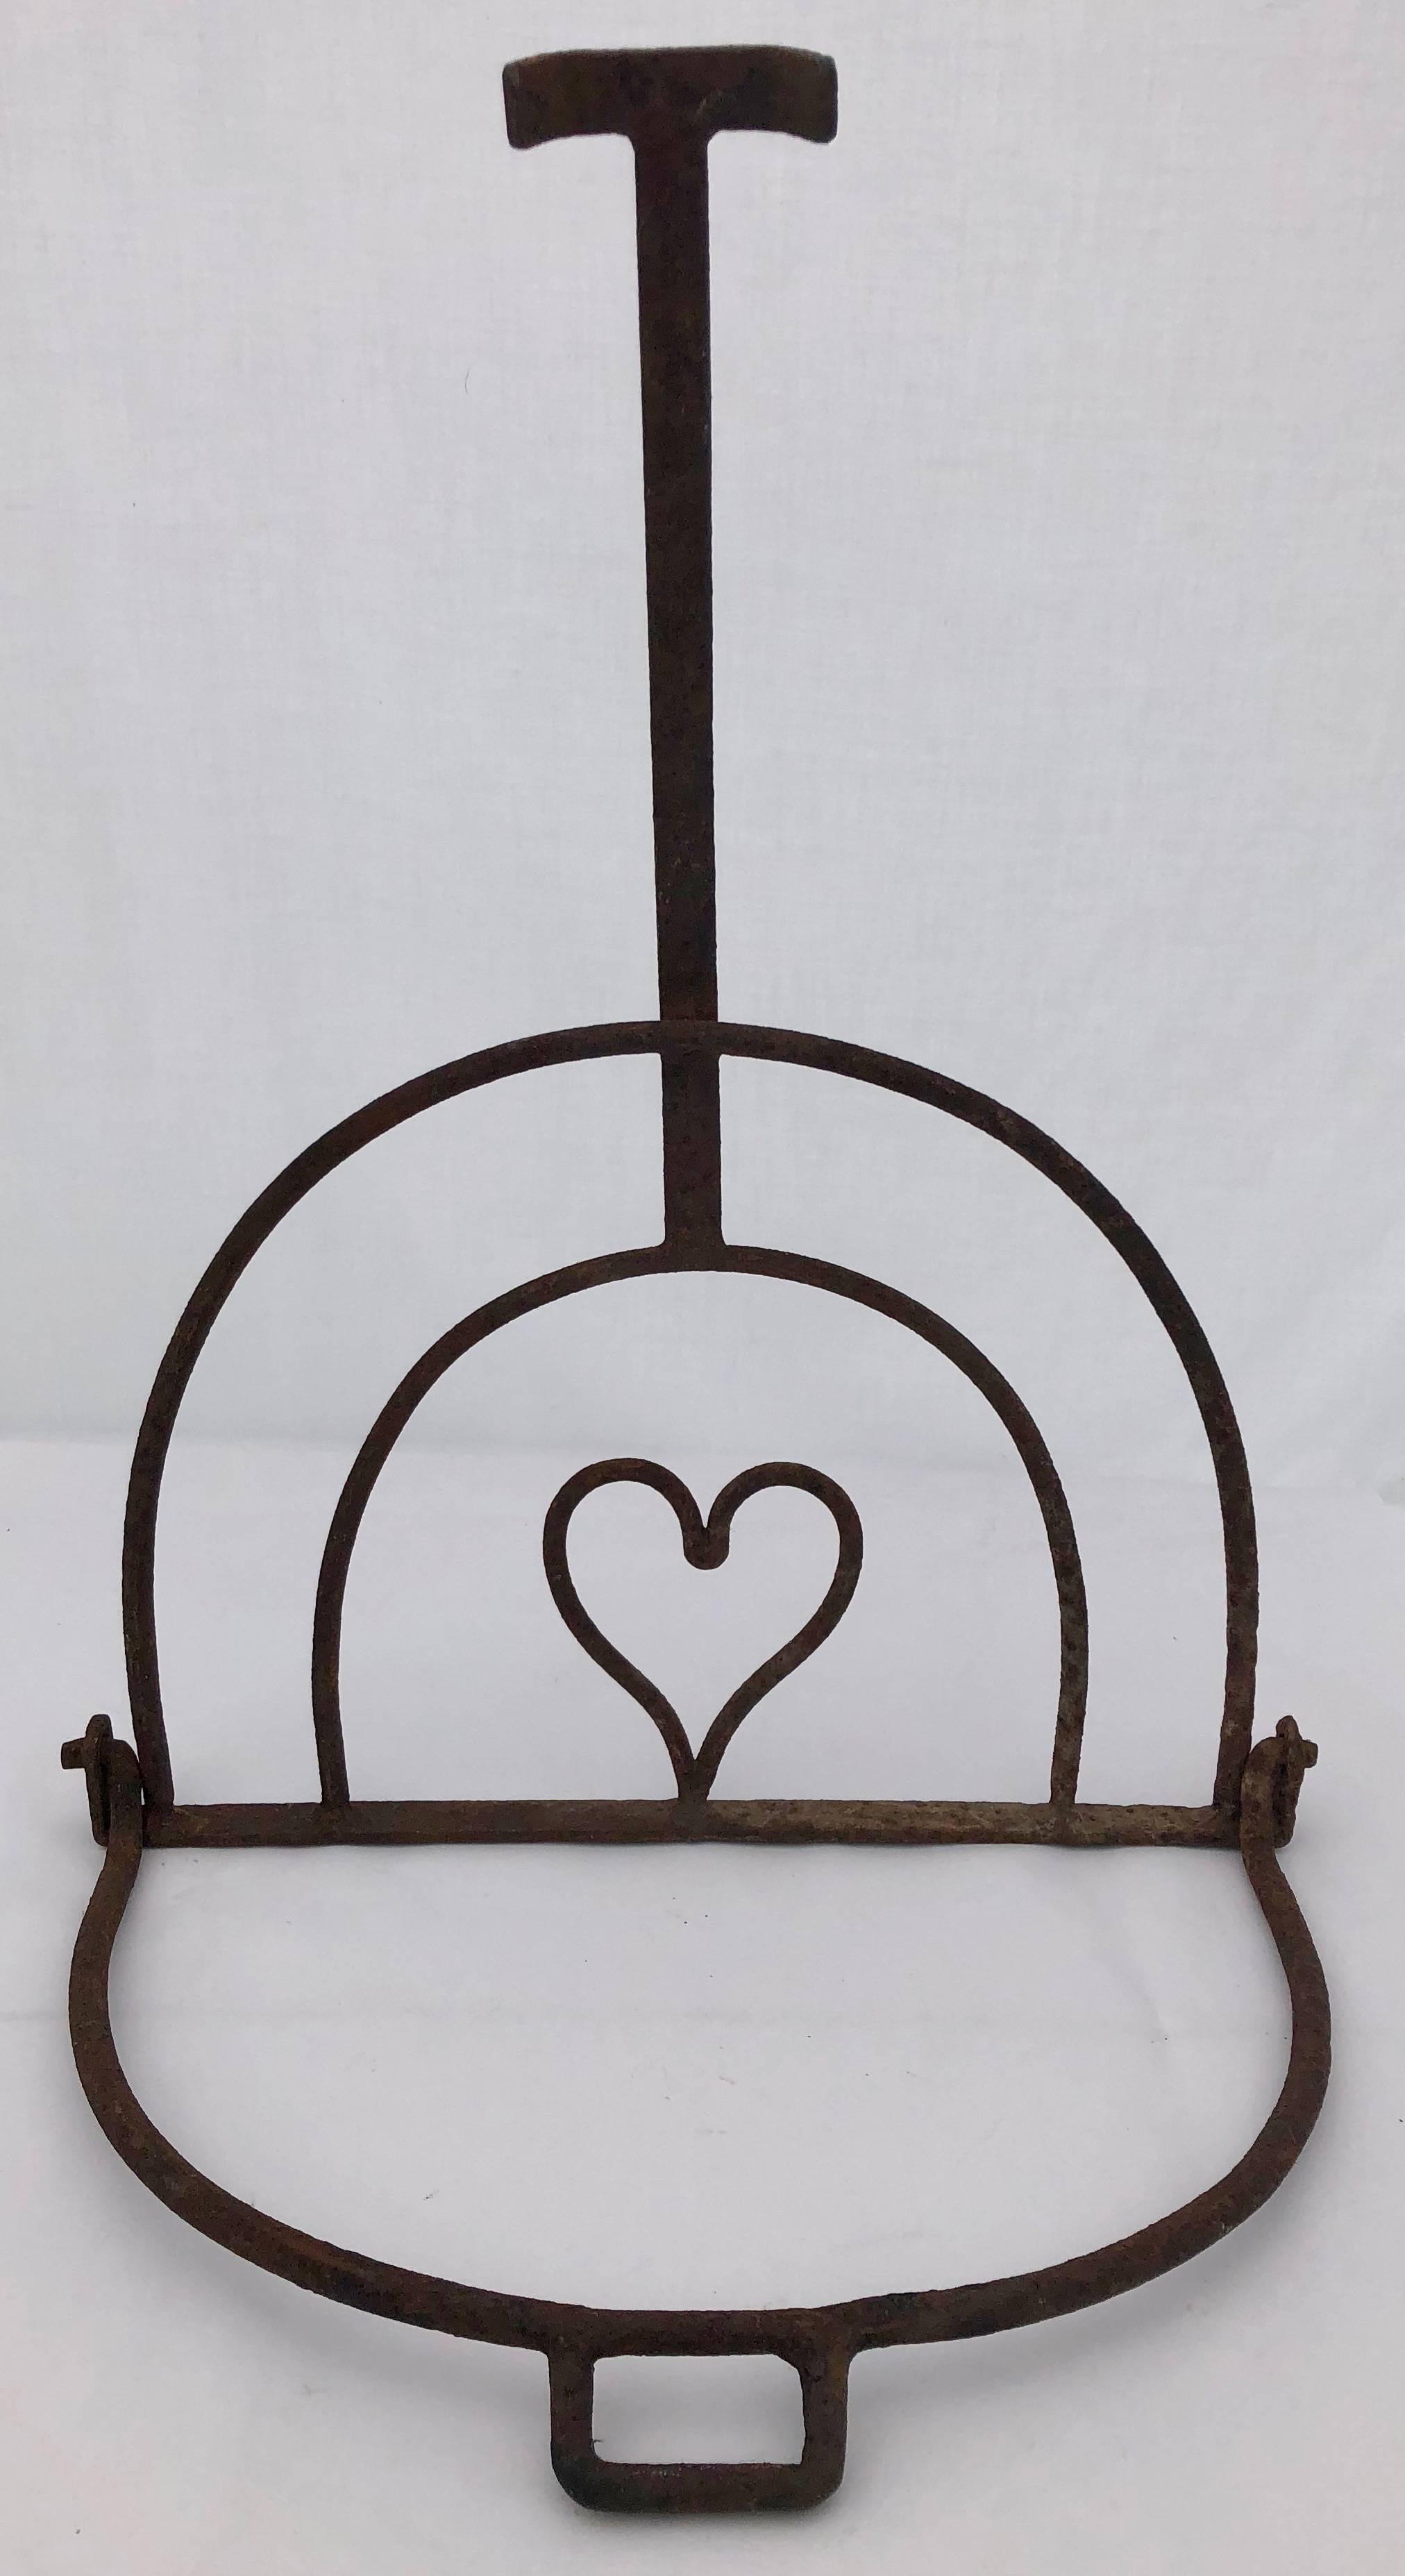 This is a lovely French fireplace forged iron pot holder with a charming heart at its center. It is from the 1800s and would add such charm hanging by a fireplace or displayed on any wall as a beautiful French hand-forged decoration. It is truly a